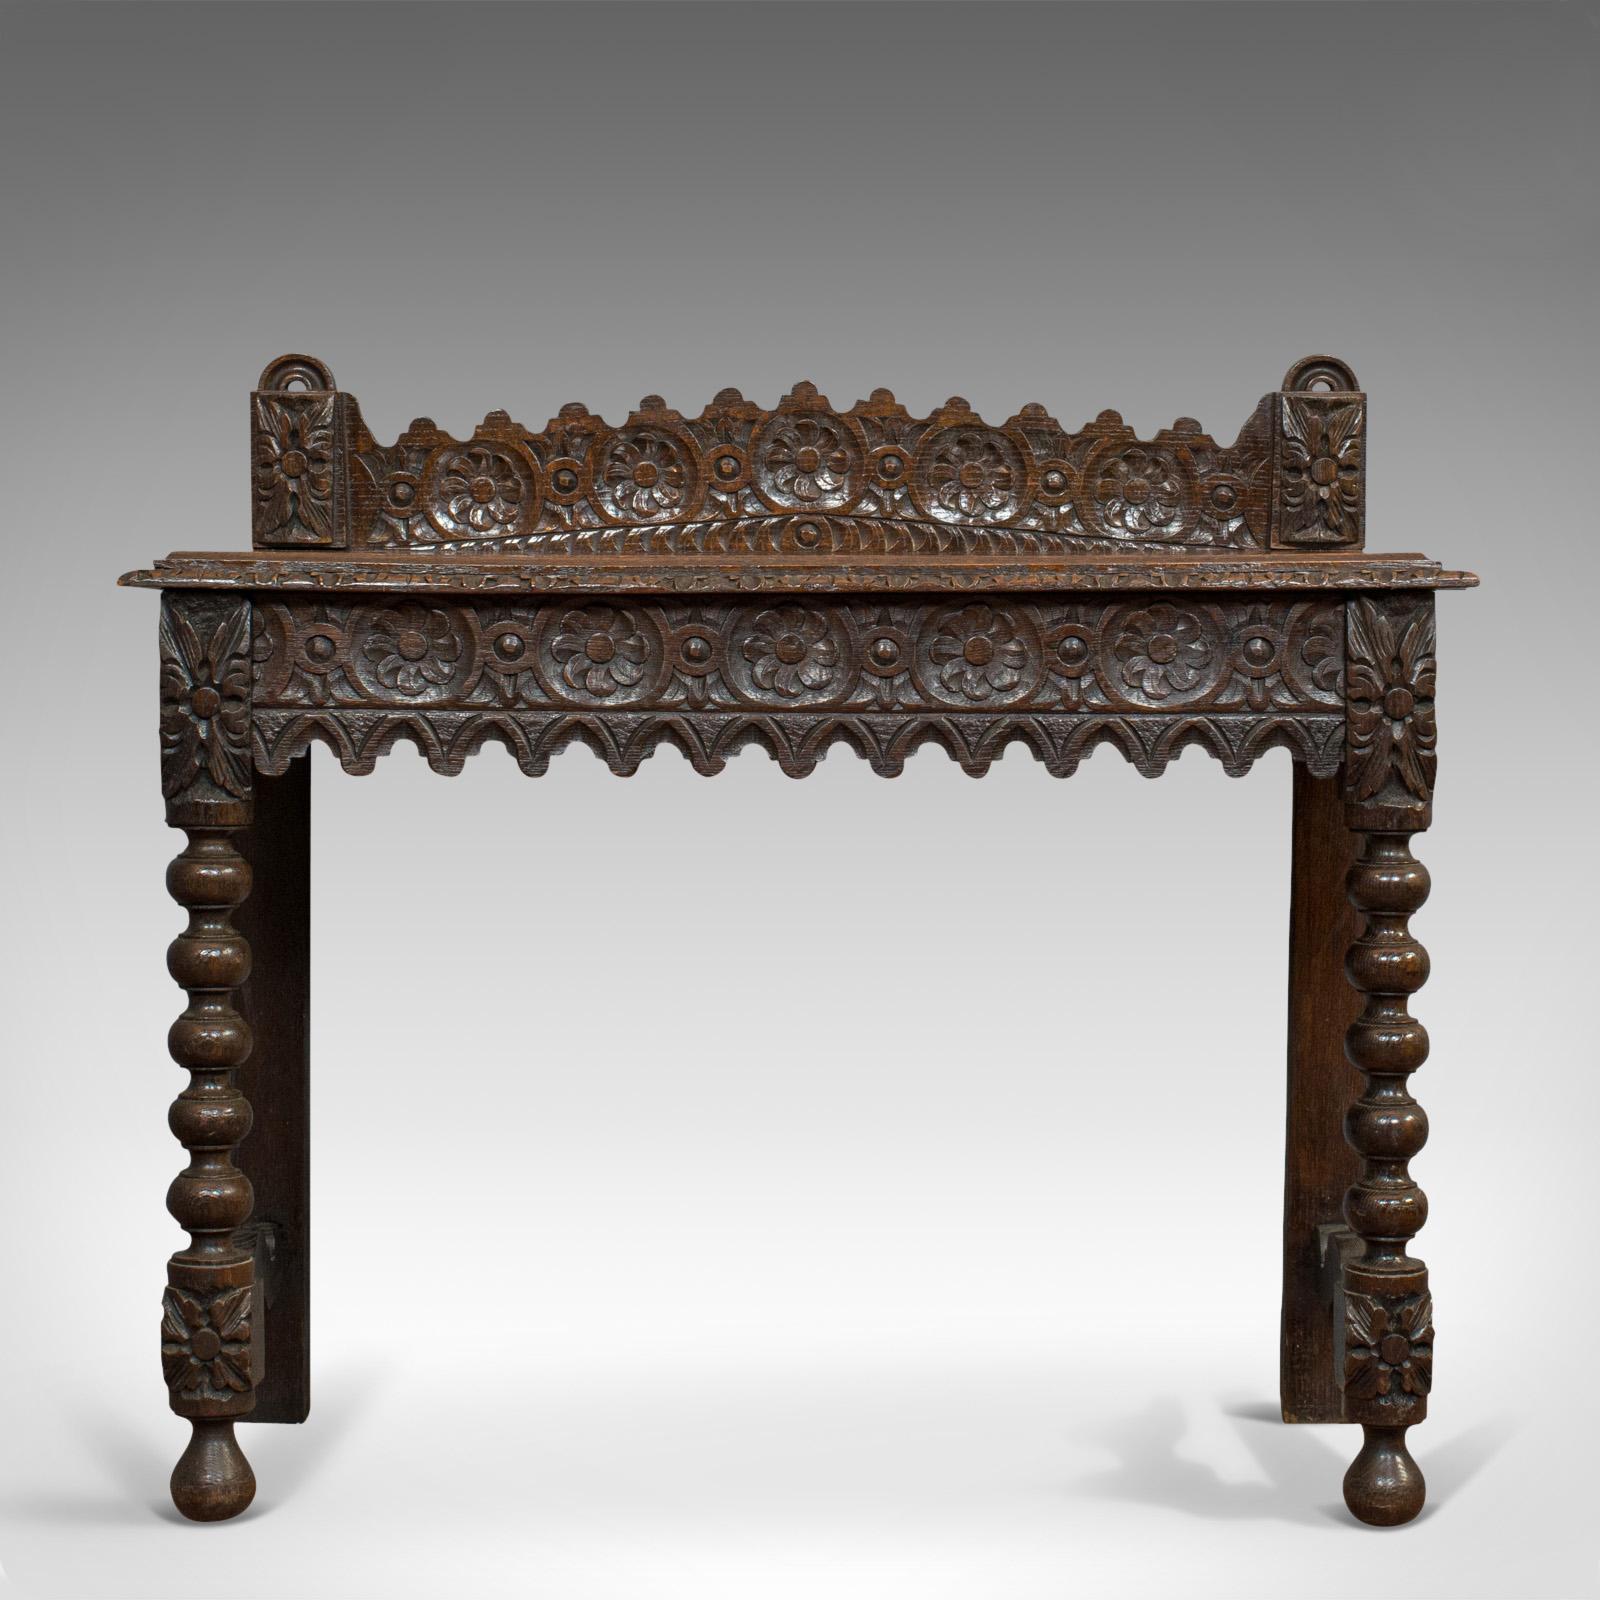 This is an antique side table. A Scottish, oak console table with bobbin turned legs, dating to the Victorian period, circa 1870.

Gothic revival taste with wonderful carved decoration
Displays a desirable aged patina
Select oak resplendent in